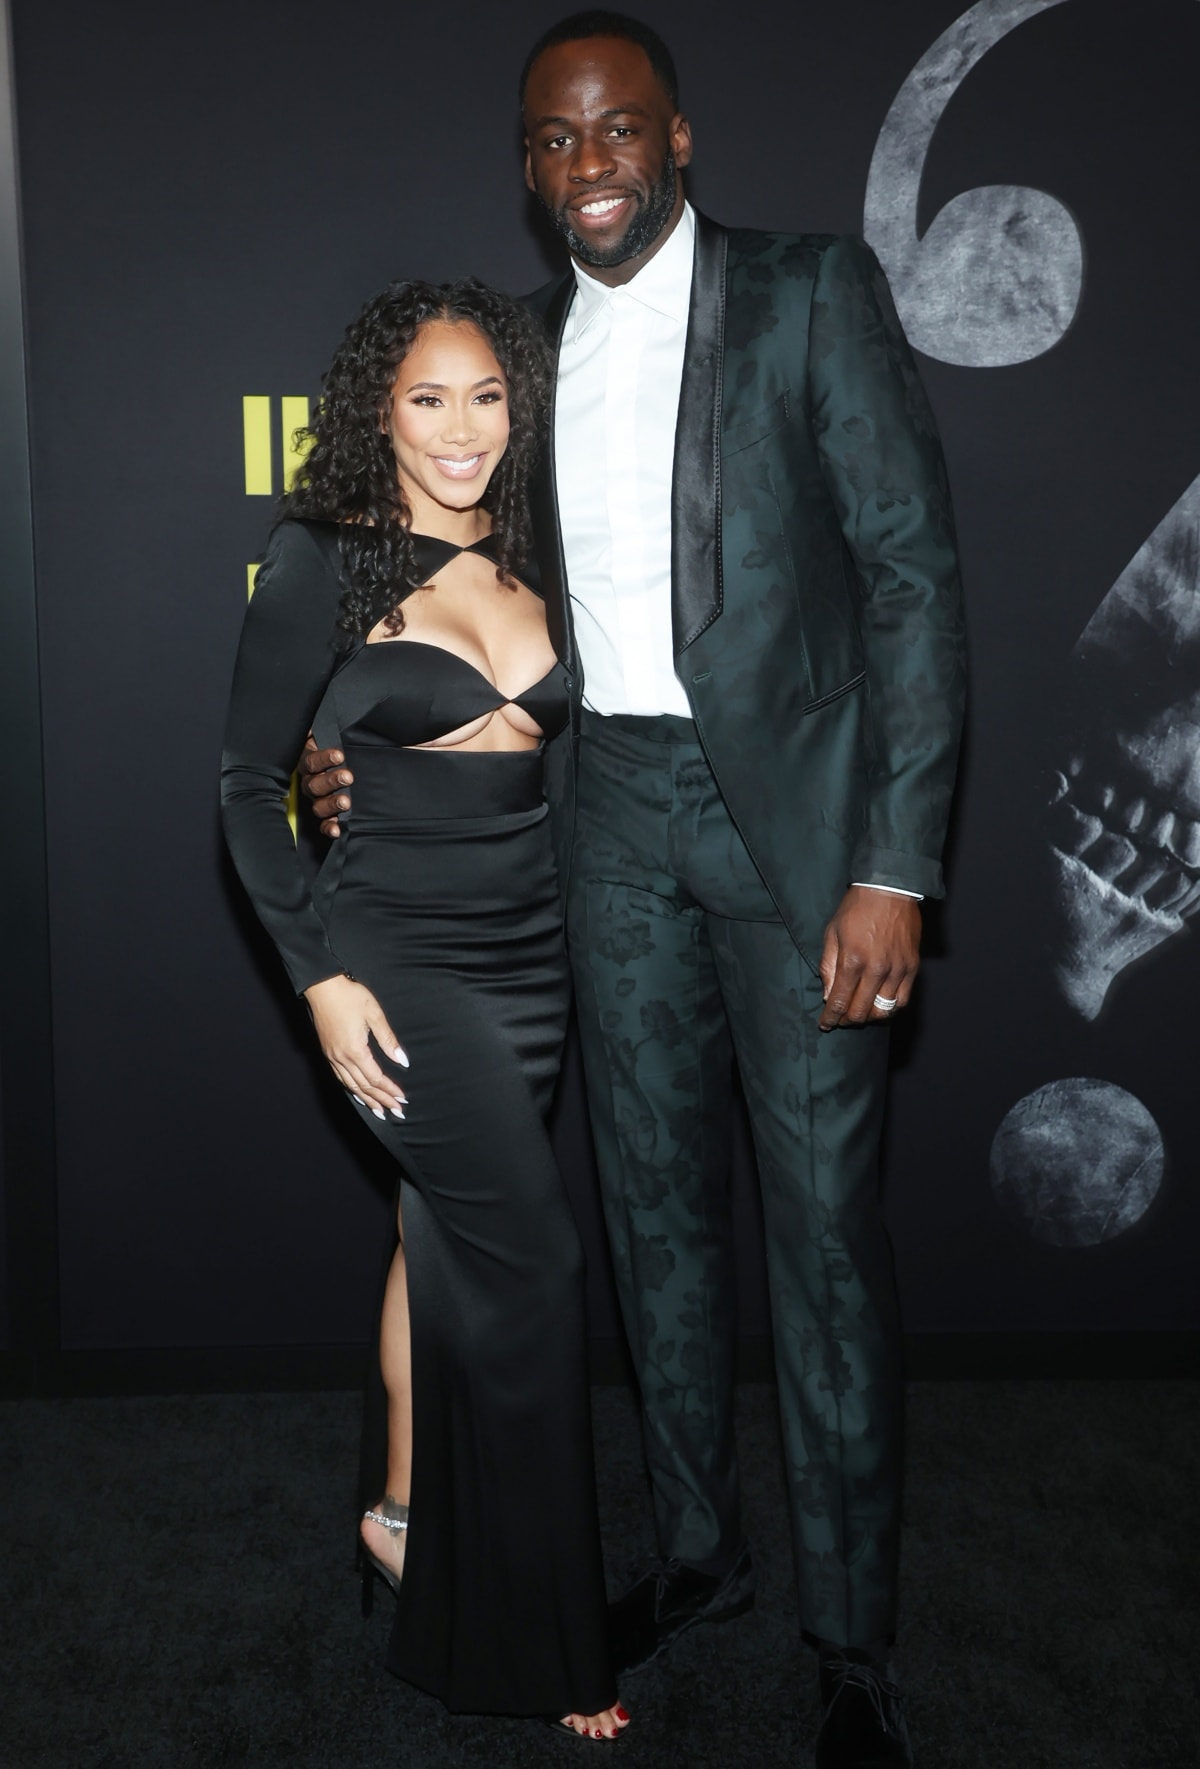 Despite Hazel Renee’s high heels, Draymond Green towers over his wife at the world premiere of Fear